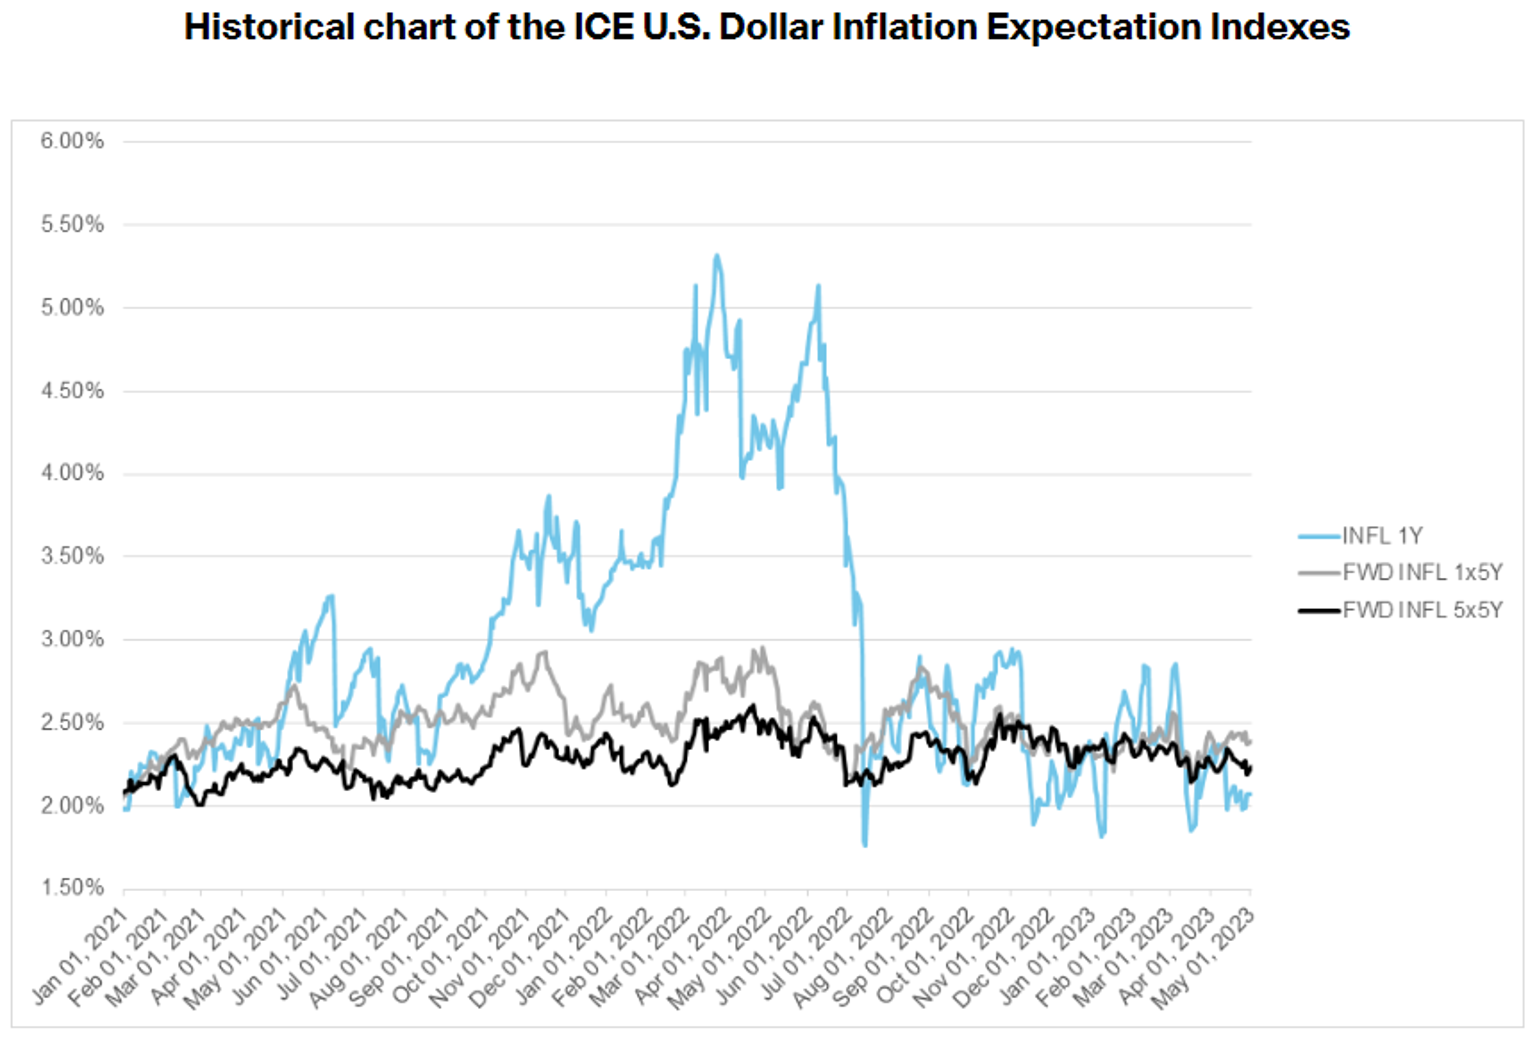 U.S. Historical chart of the ICE U.S. Dollar Inflation Expectation Indexes